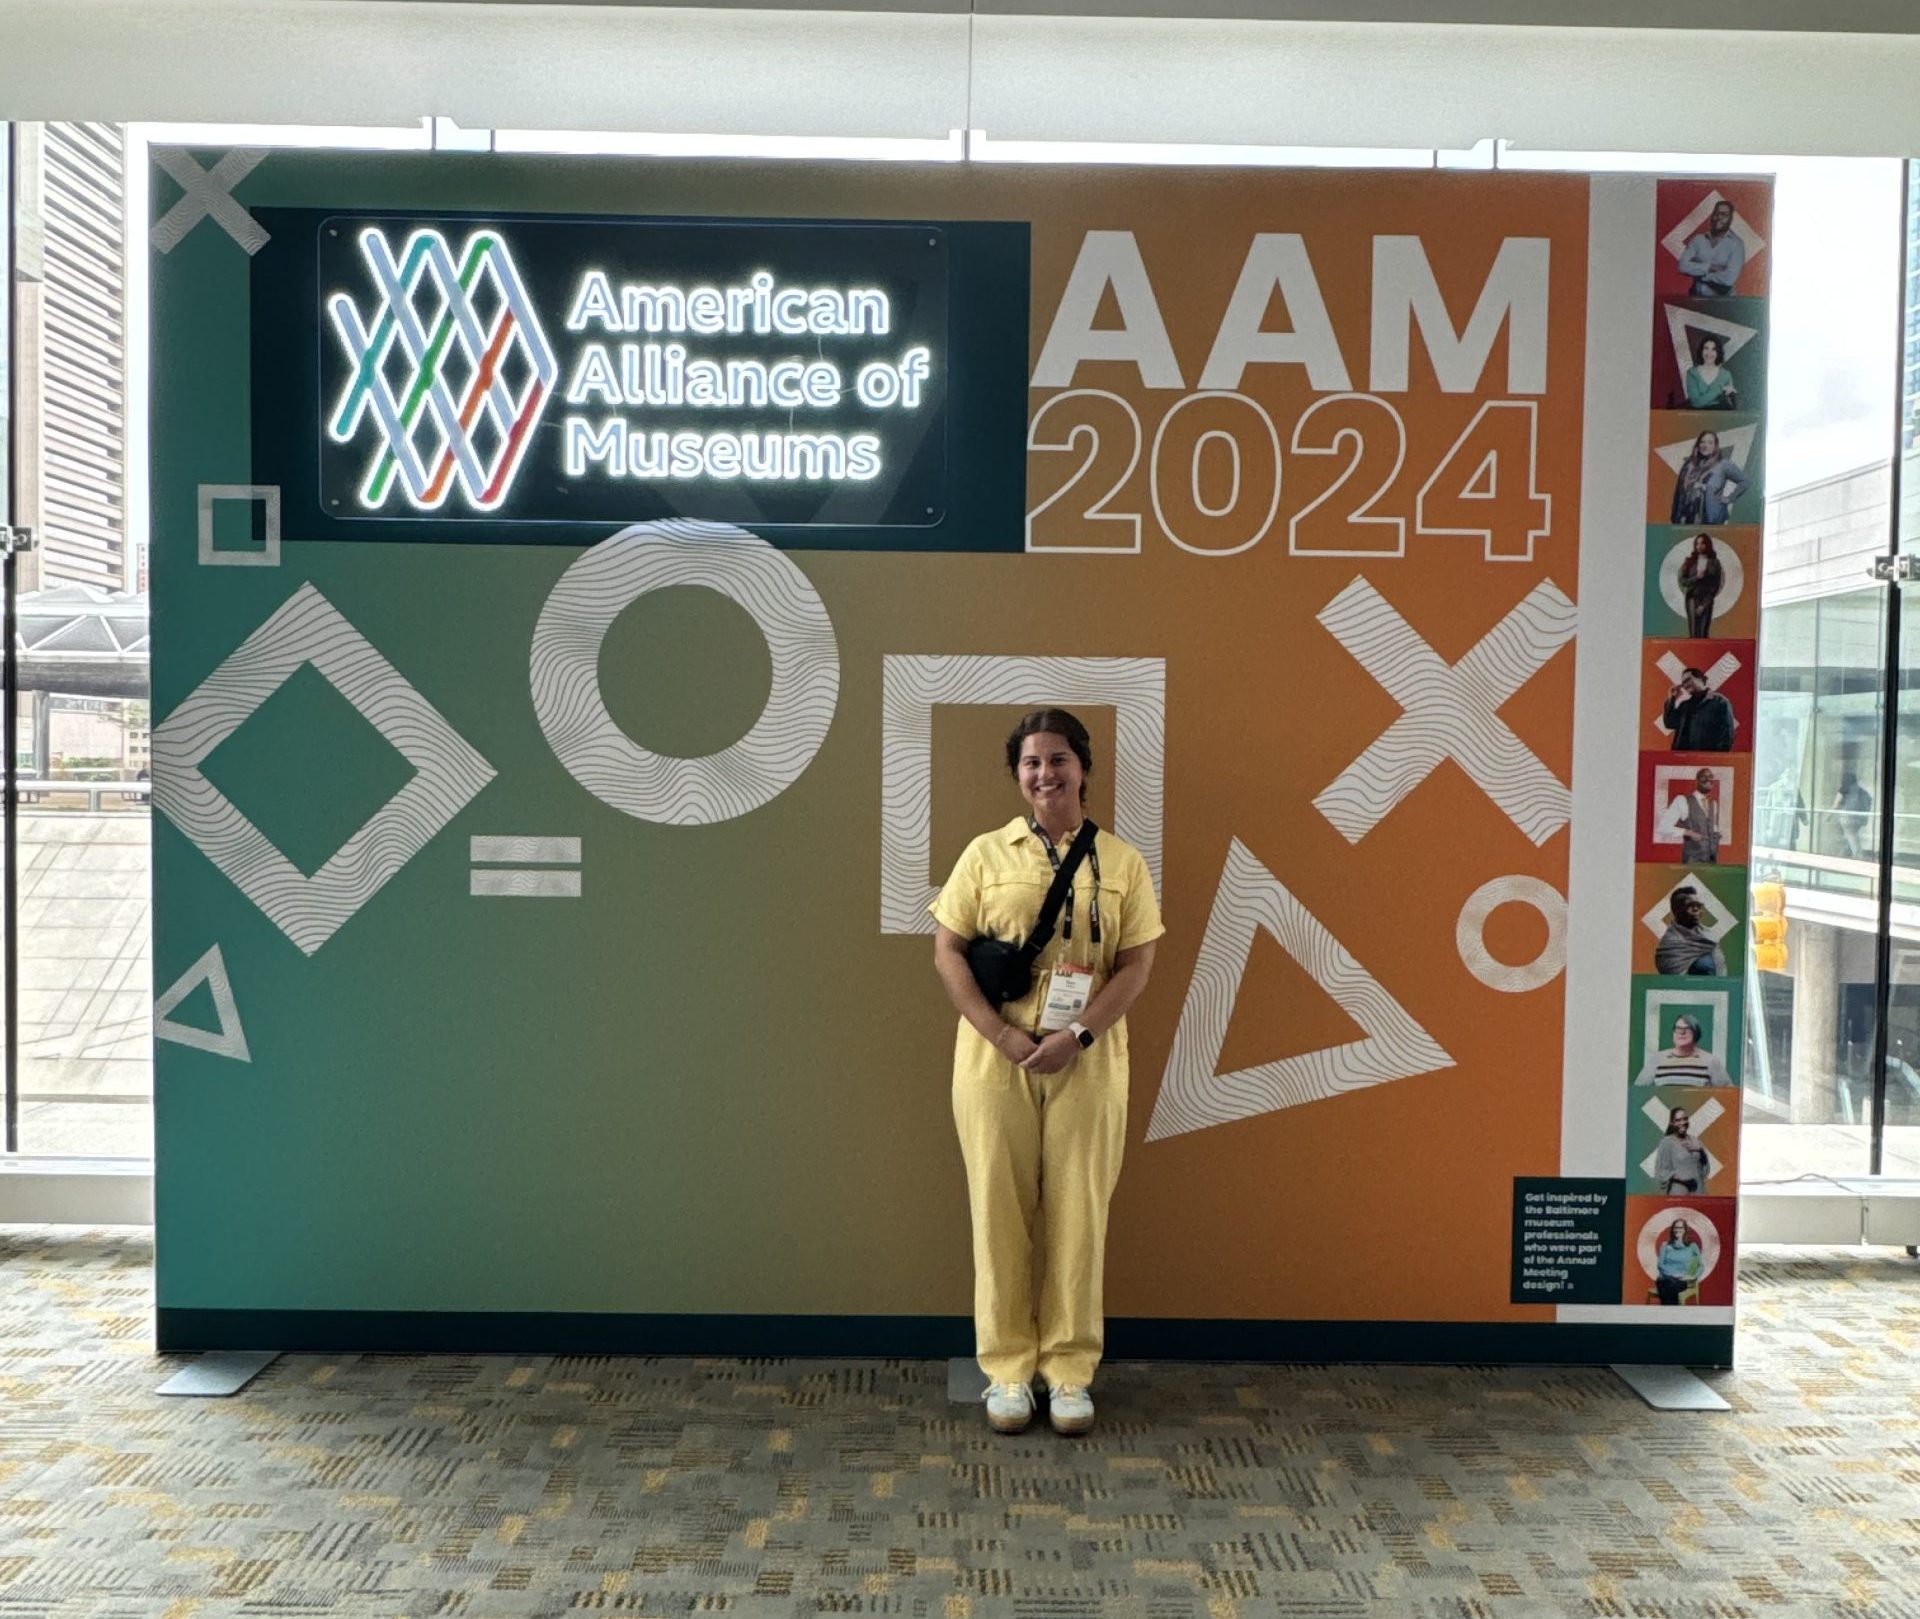 Bryce standing in front of an American Alliance of Museums 2024 Museum Expo backdrop.